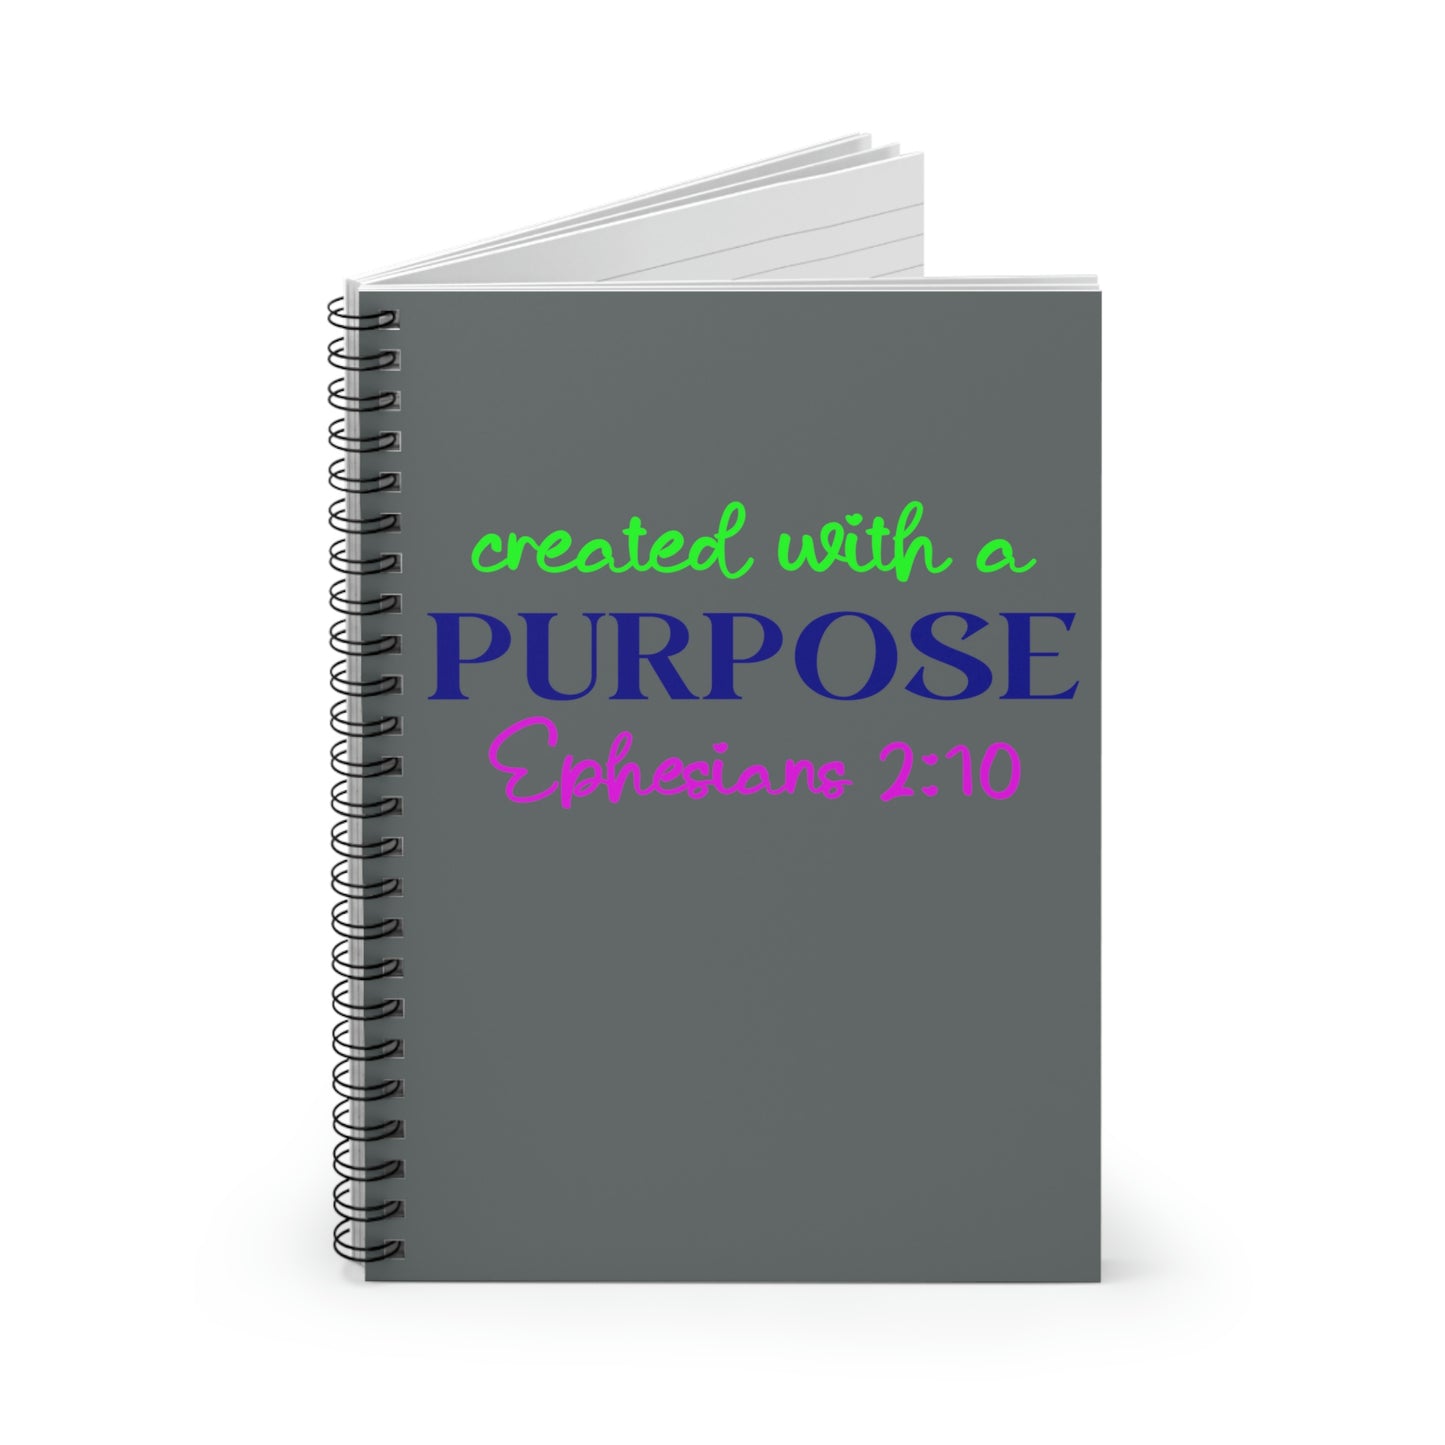 Christian Items (Created With A Purpose/ Spiral Notebook - Ruled Line)